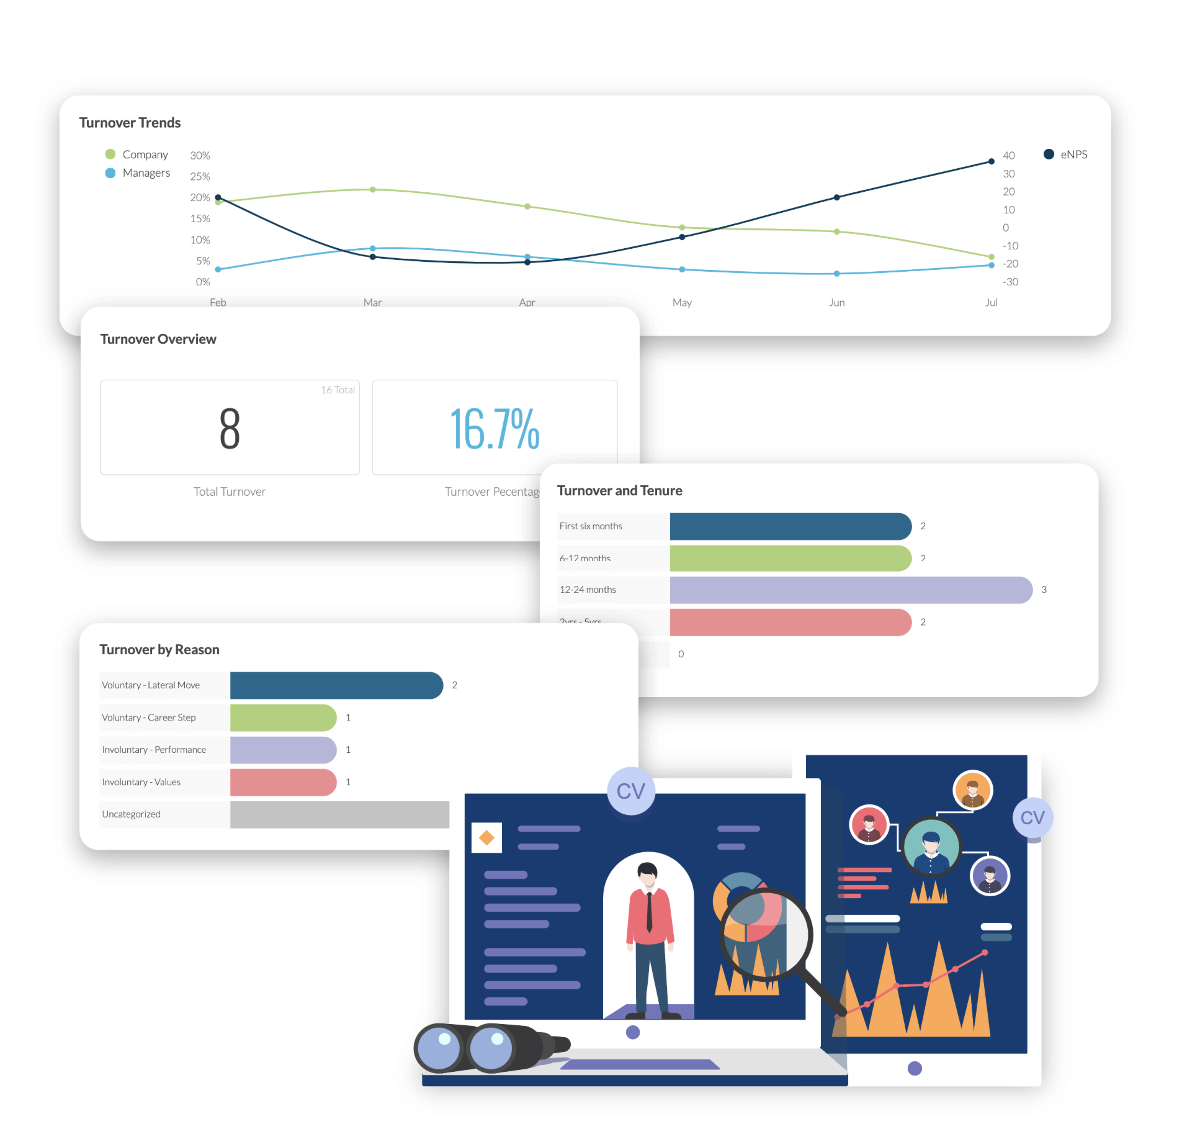 Image screenshot of the insights available on the Motivosity dashboard.